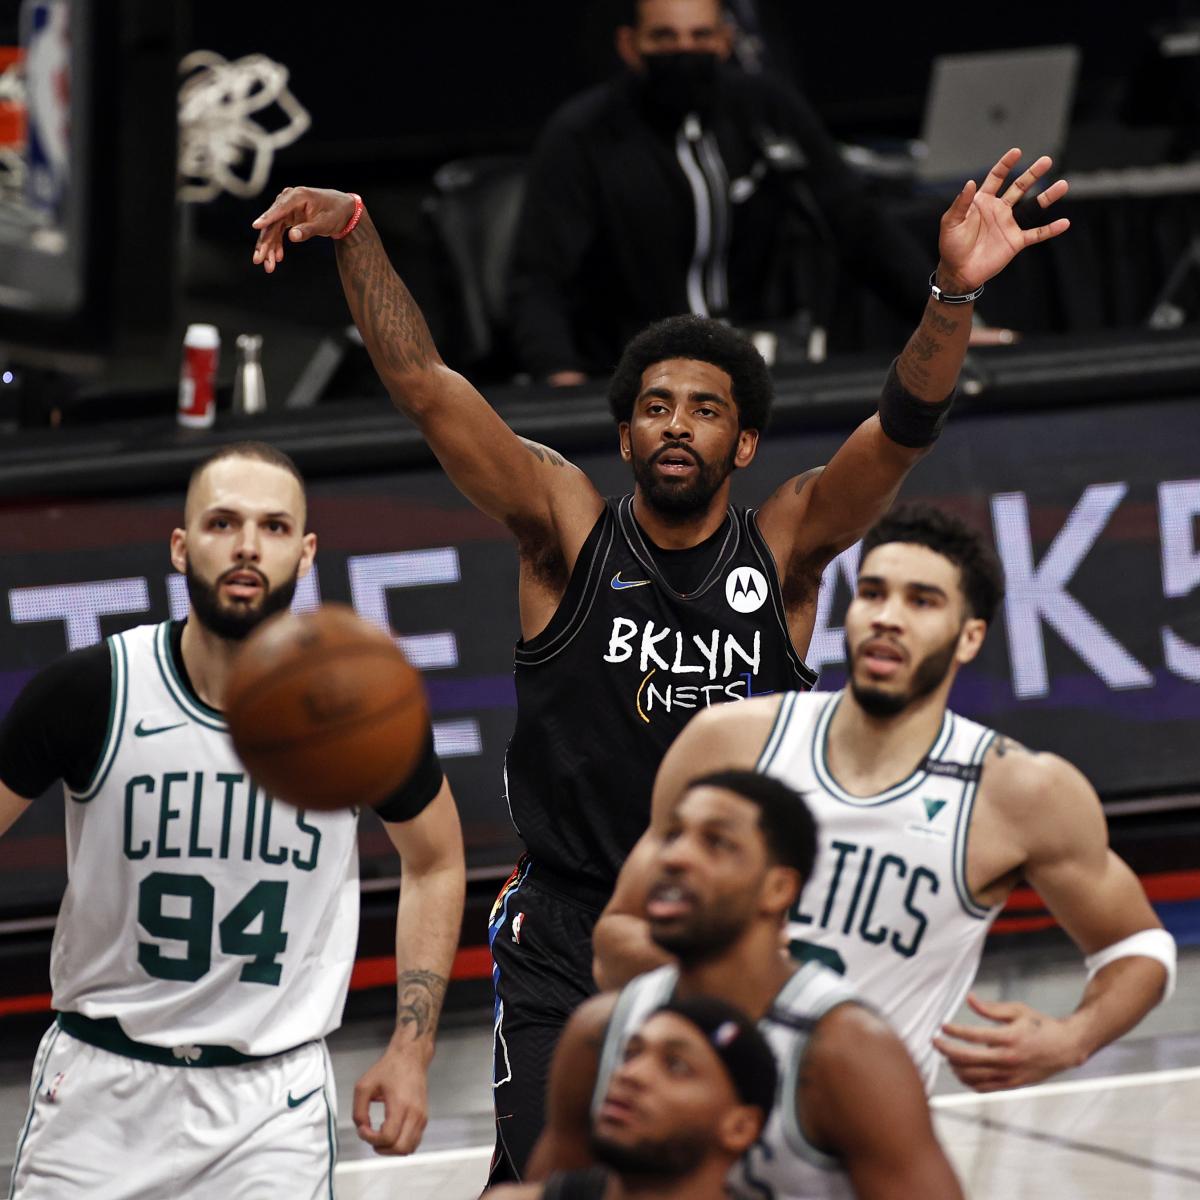 Does the curse of Lucky follow Kyrie to Dallas, or does it stay in  Brooklyn? : r/bostonceltics